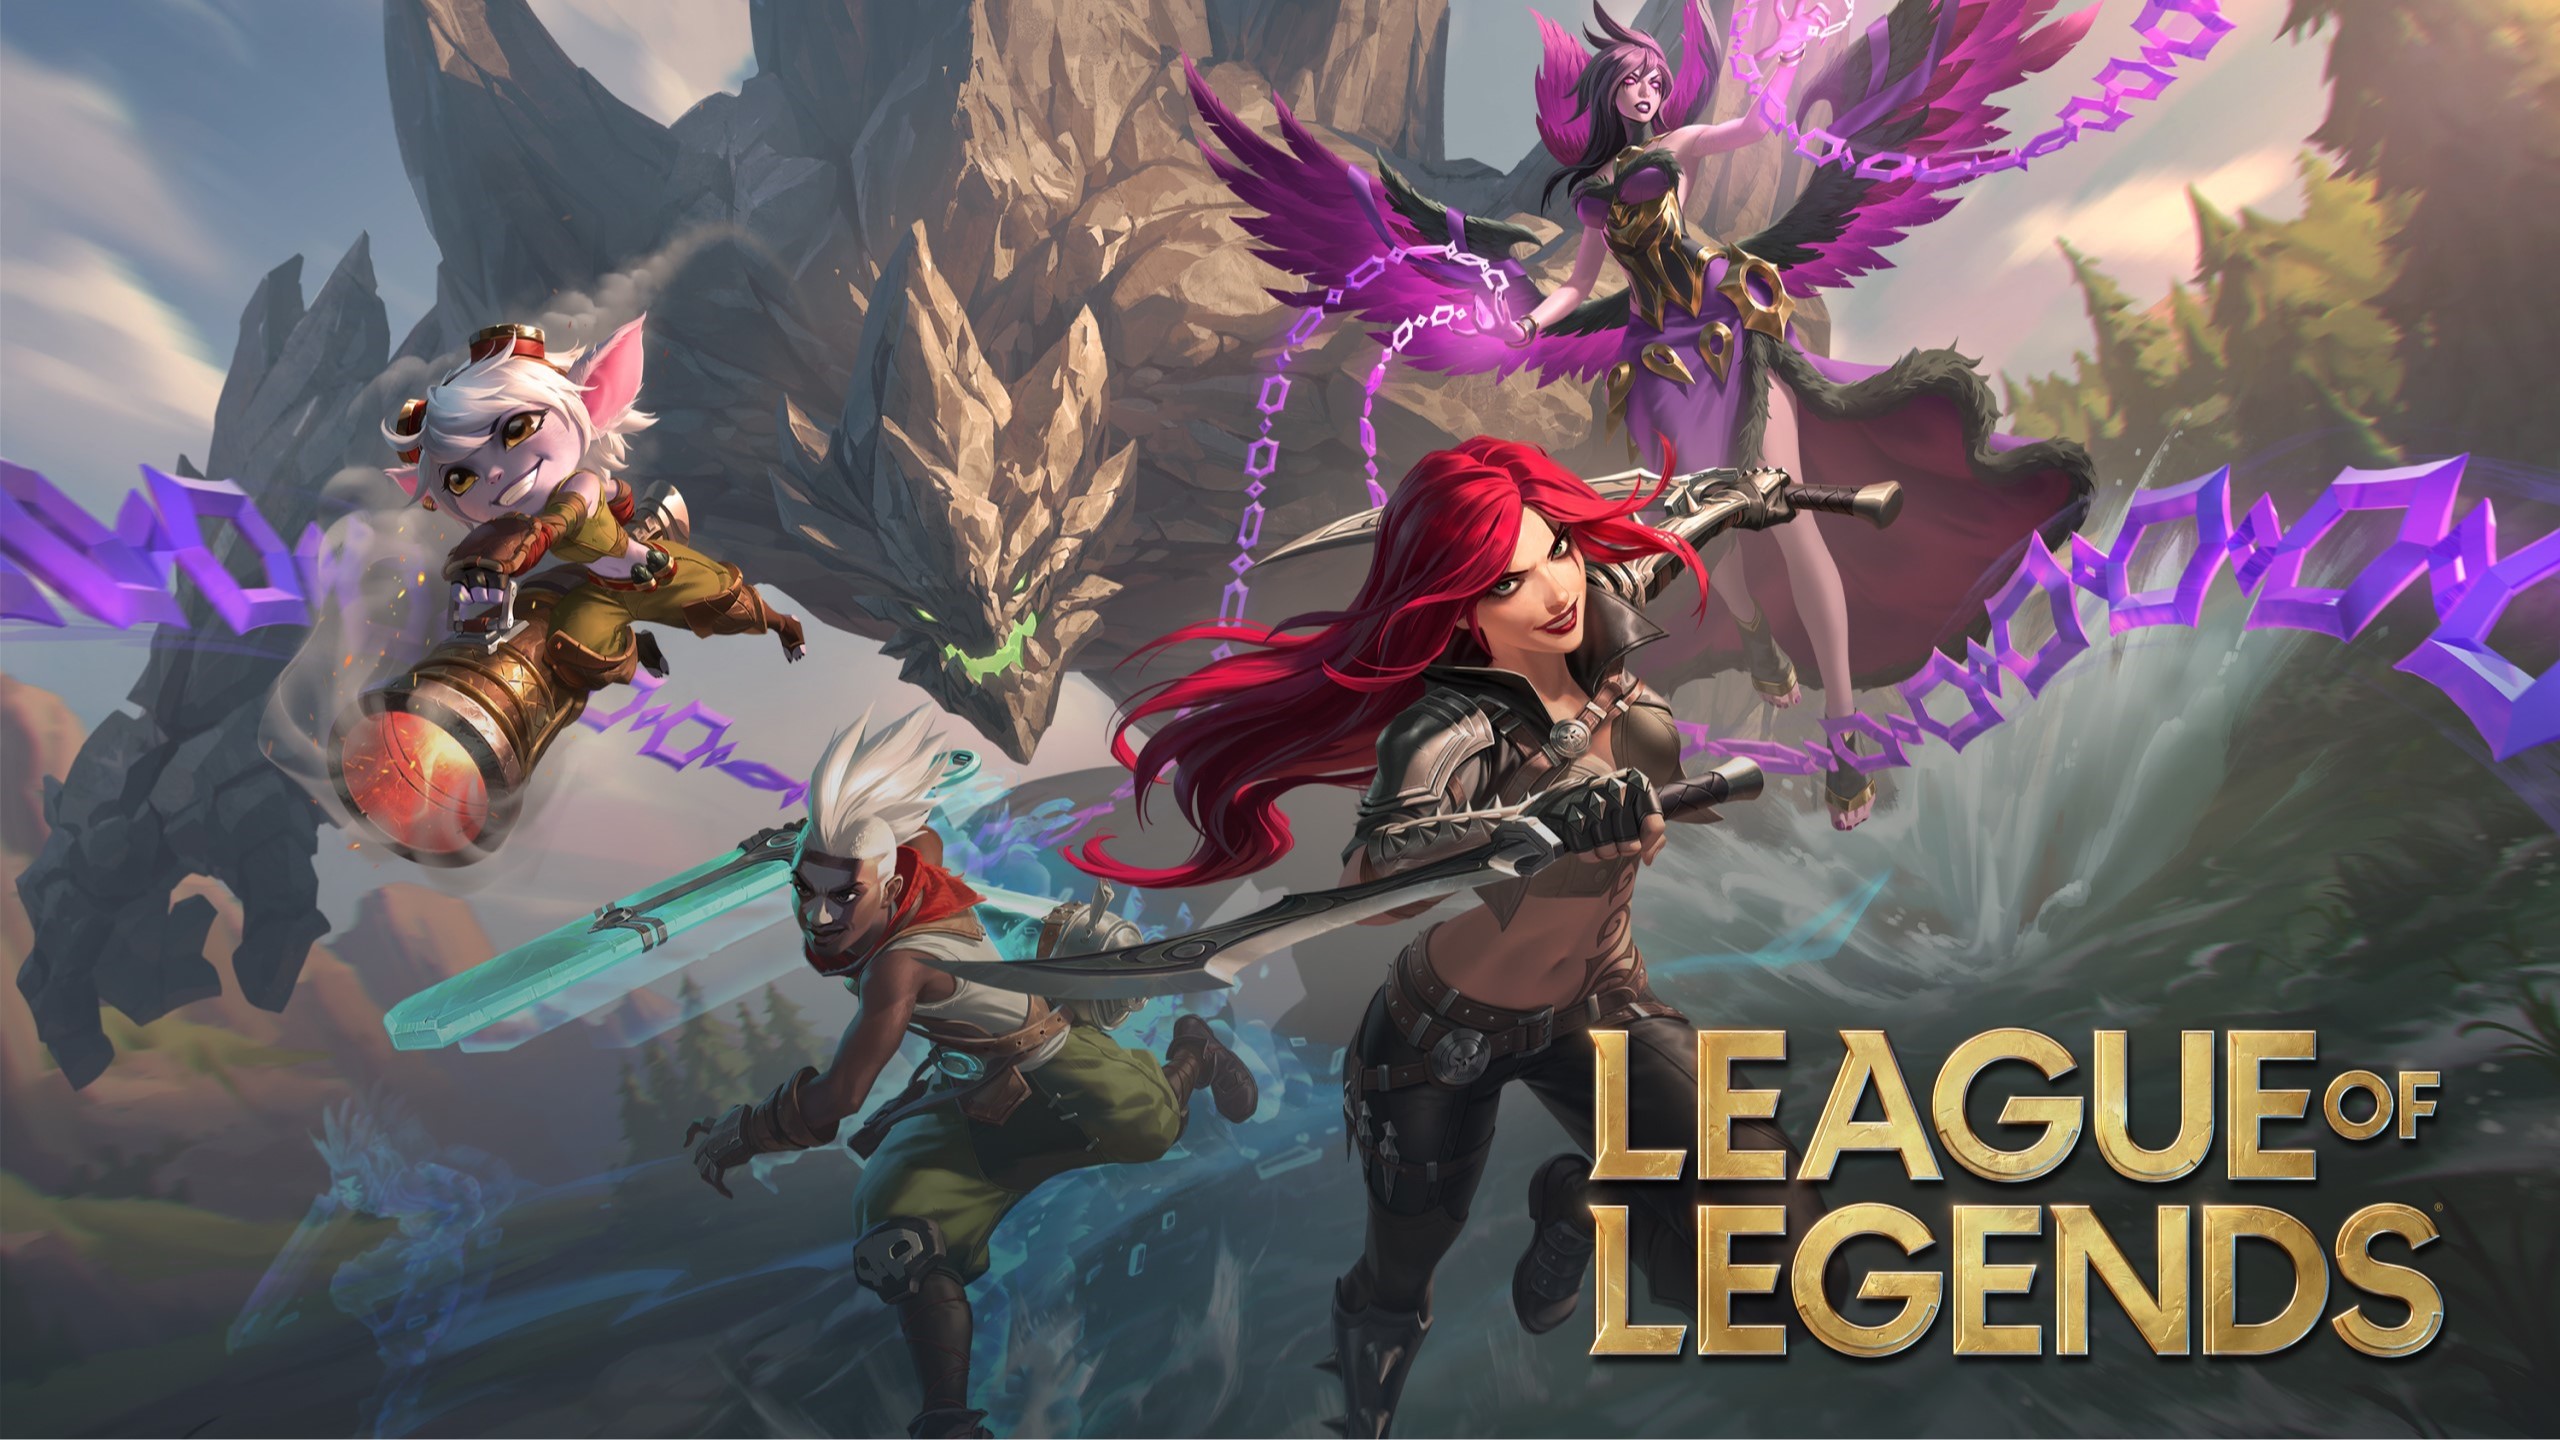 League Of Legends game poster